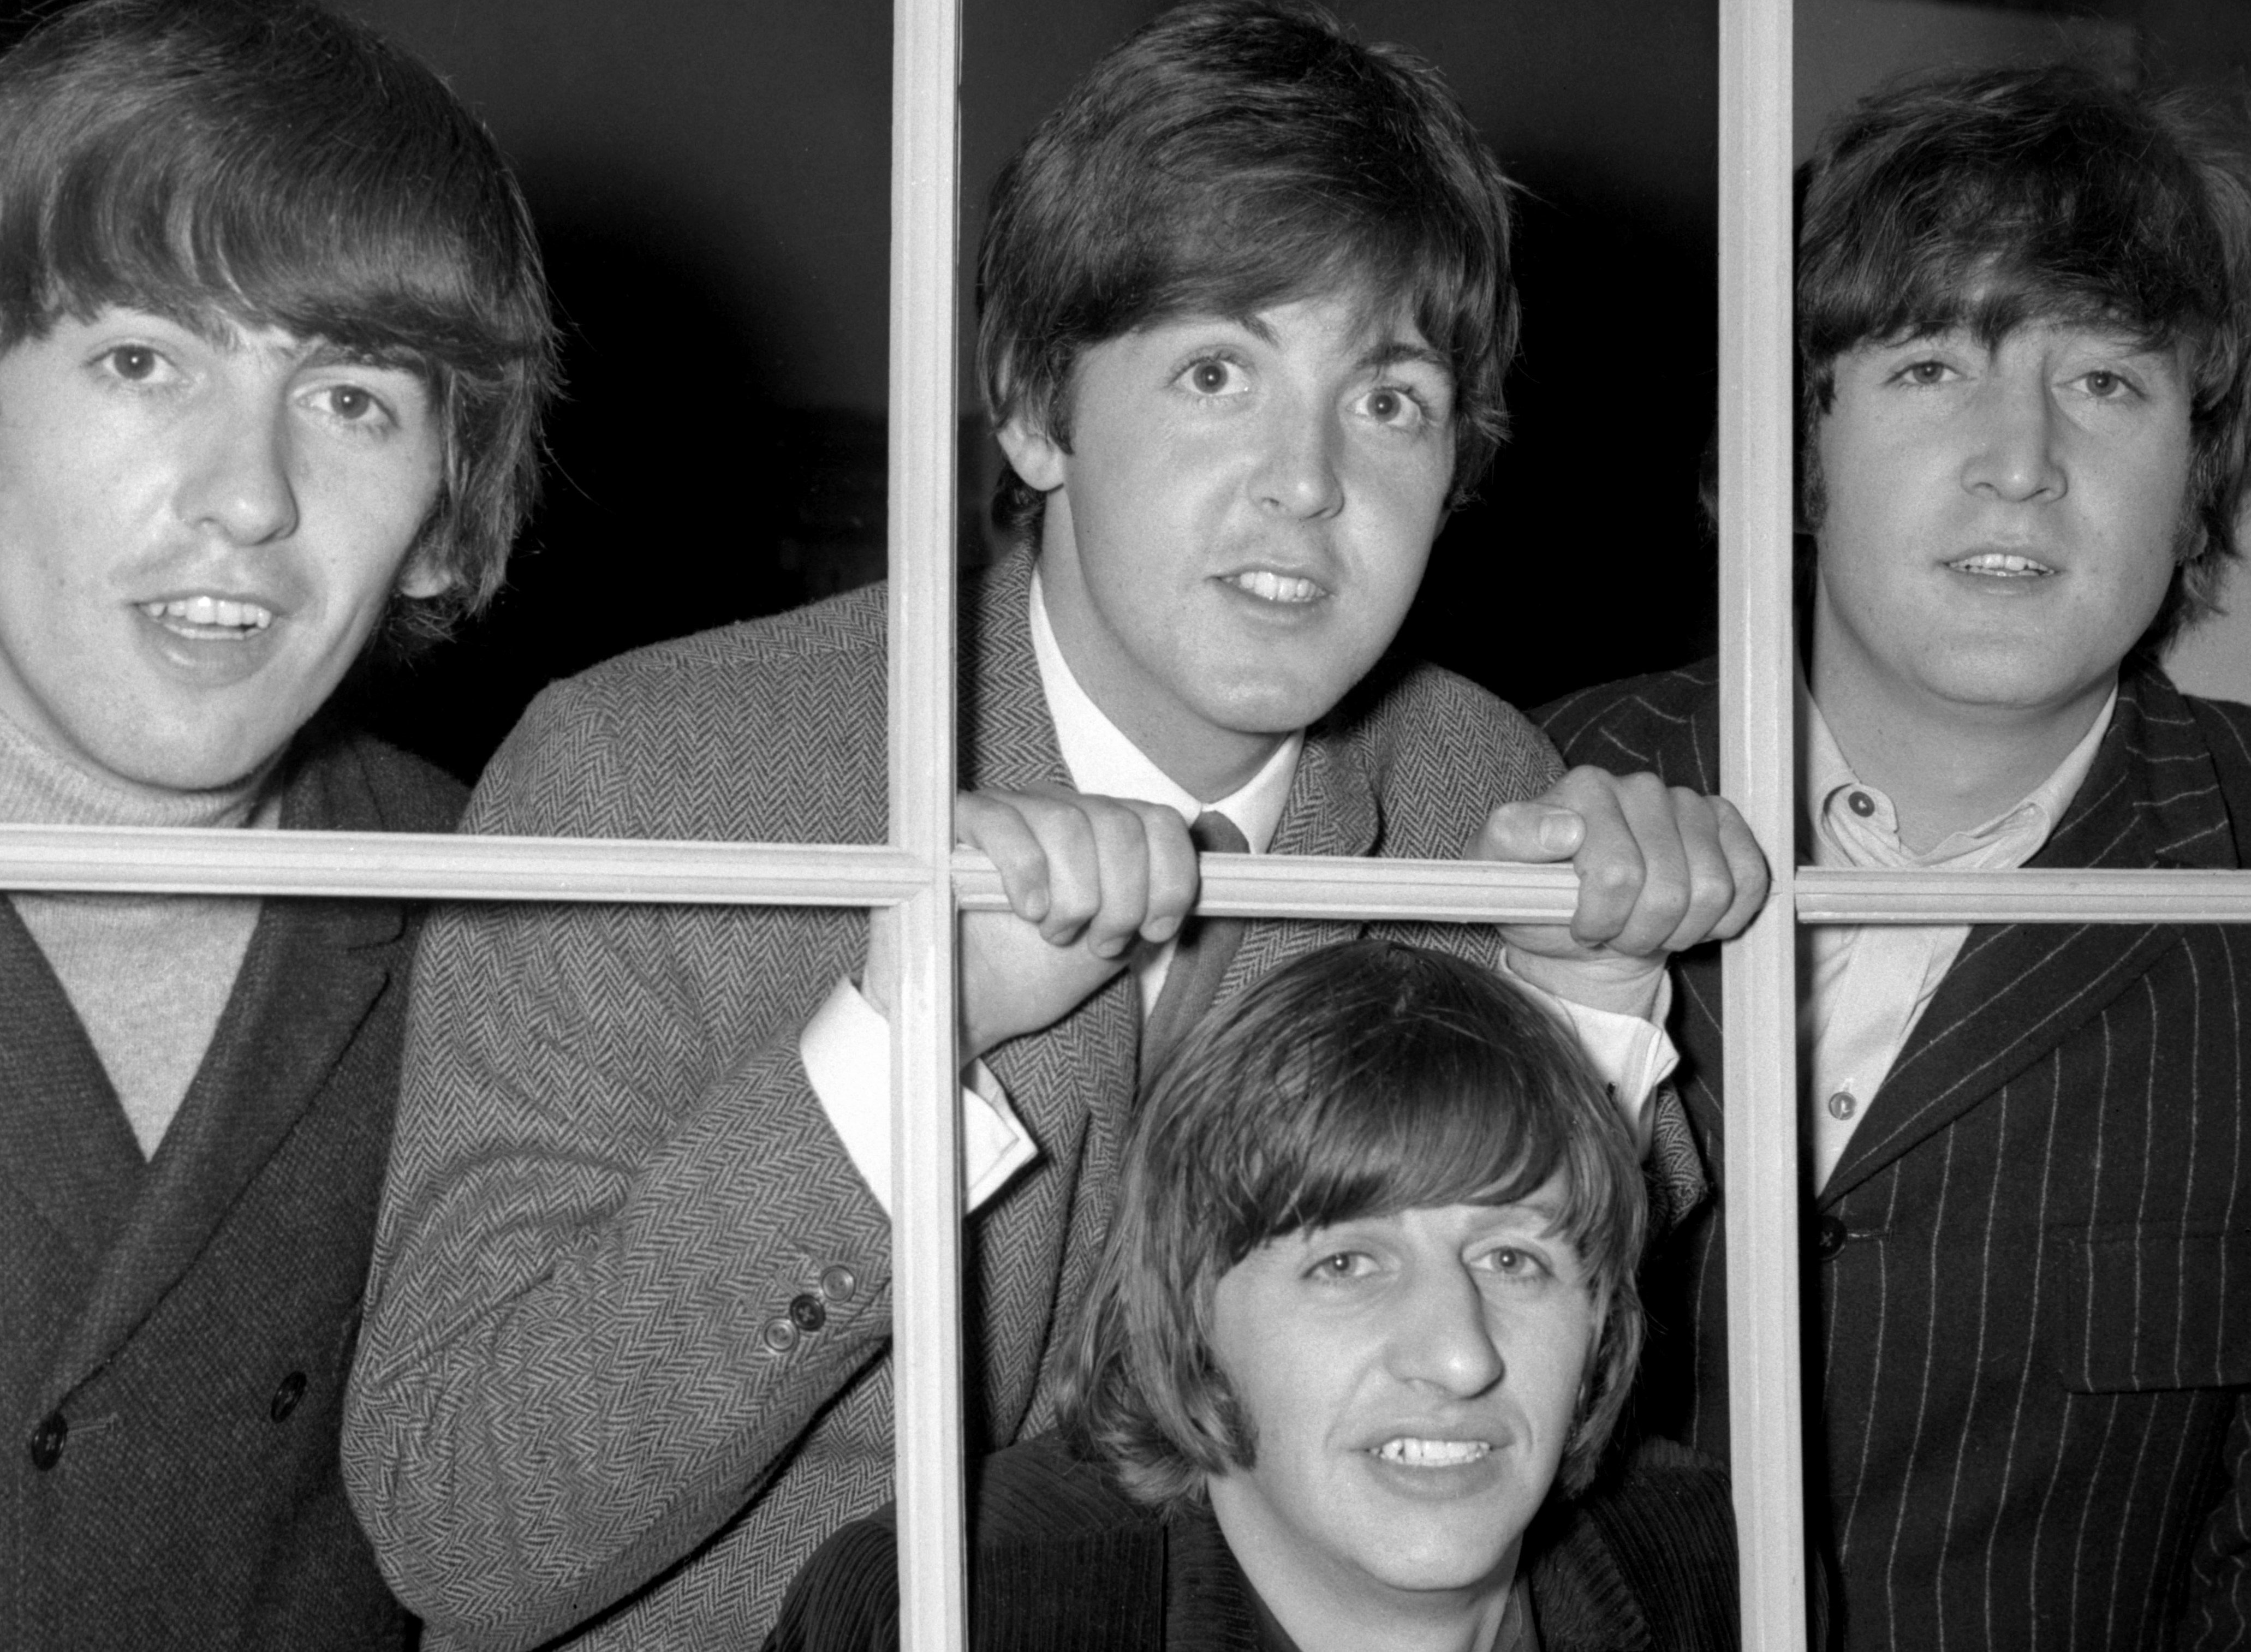 The Beatles at a window during the 'Rubber Soul' era